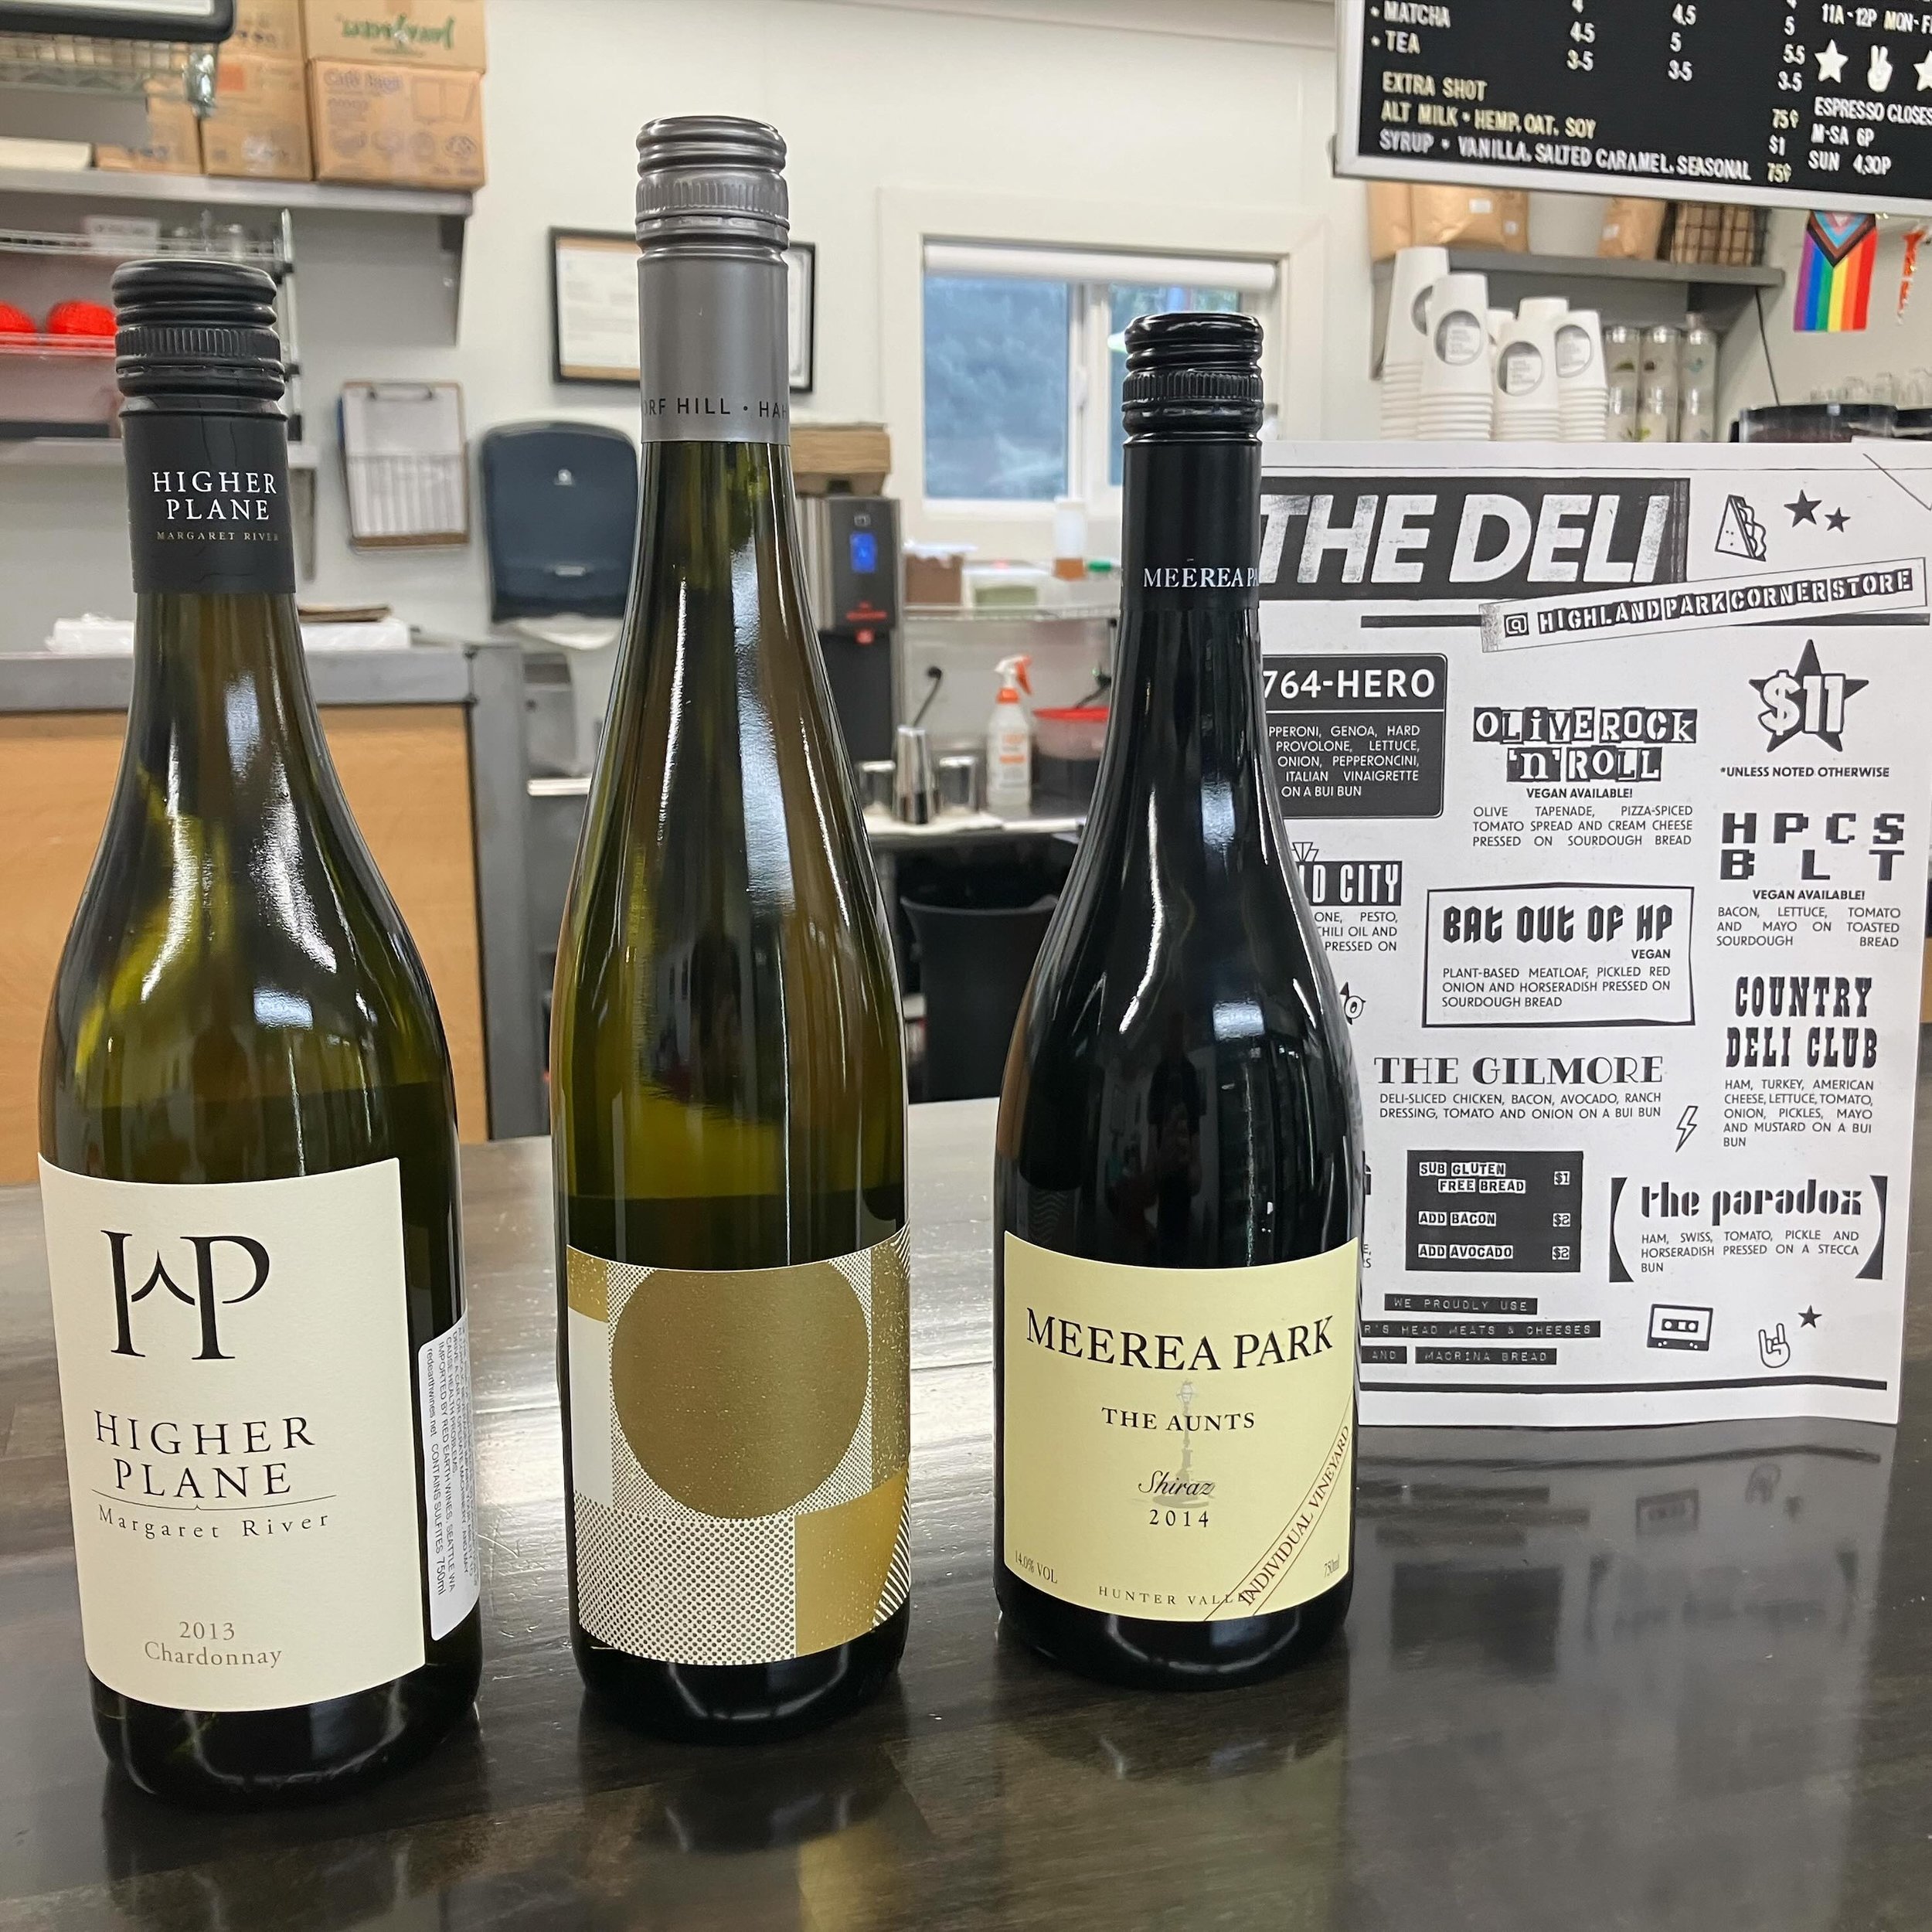 This week&rsquo;s selections for Corner Pour wine tasting with Clark! We&rsquo;ll have more Australian wines to taste - come by and give them a try! This Thursday from 5-7:30pm. 

#winetasting #australianwine #cornerpour #highlandpark #cornerstore #w